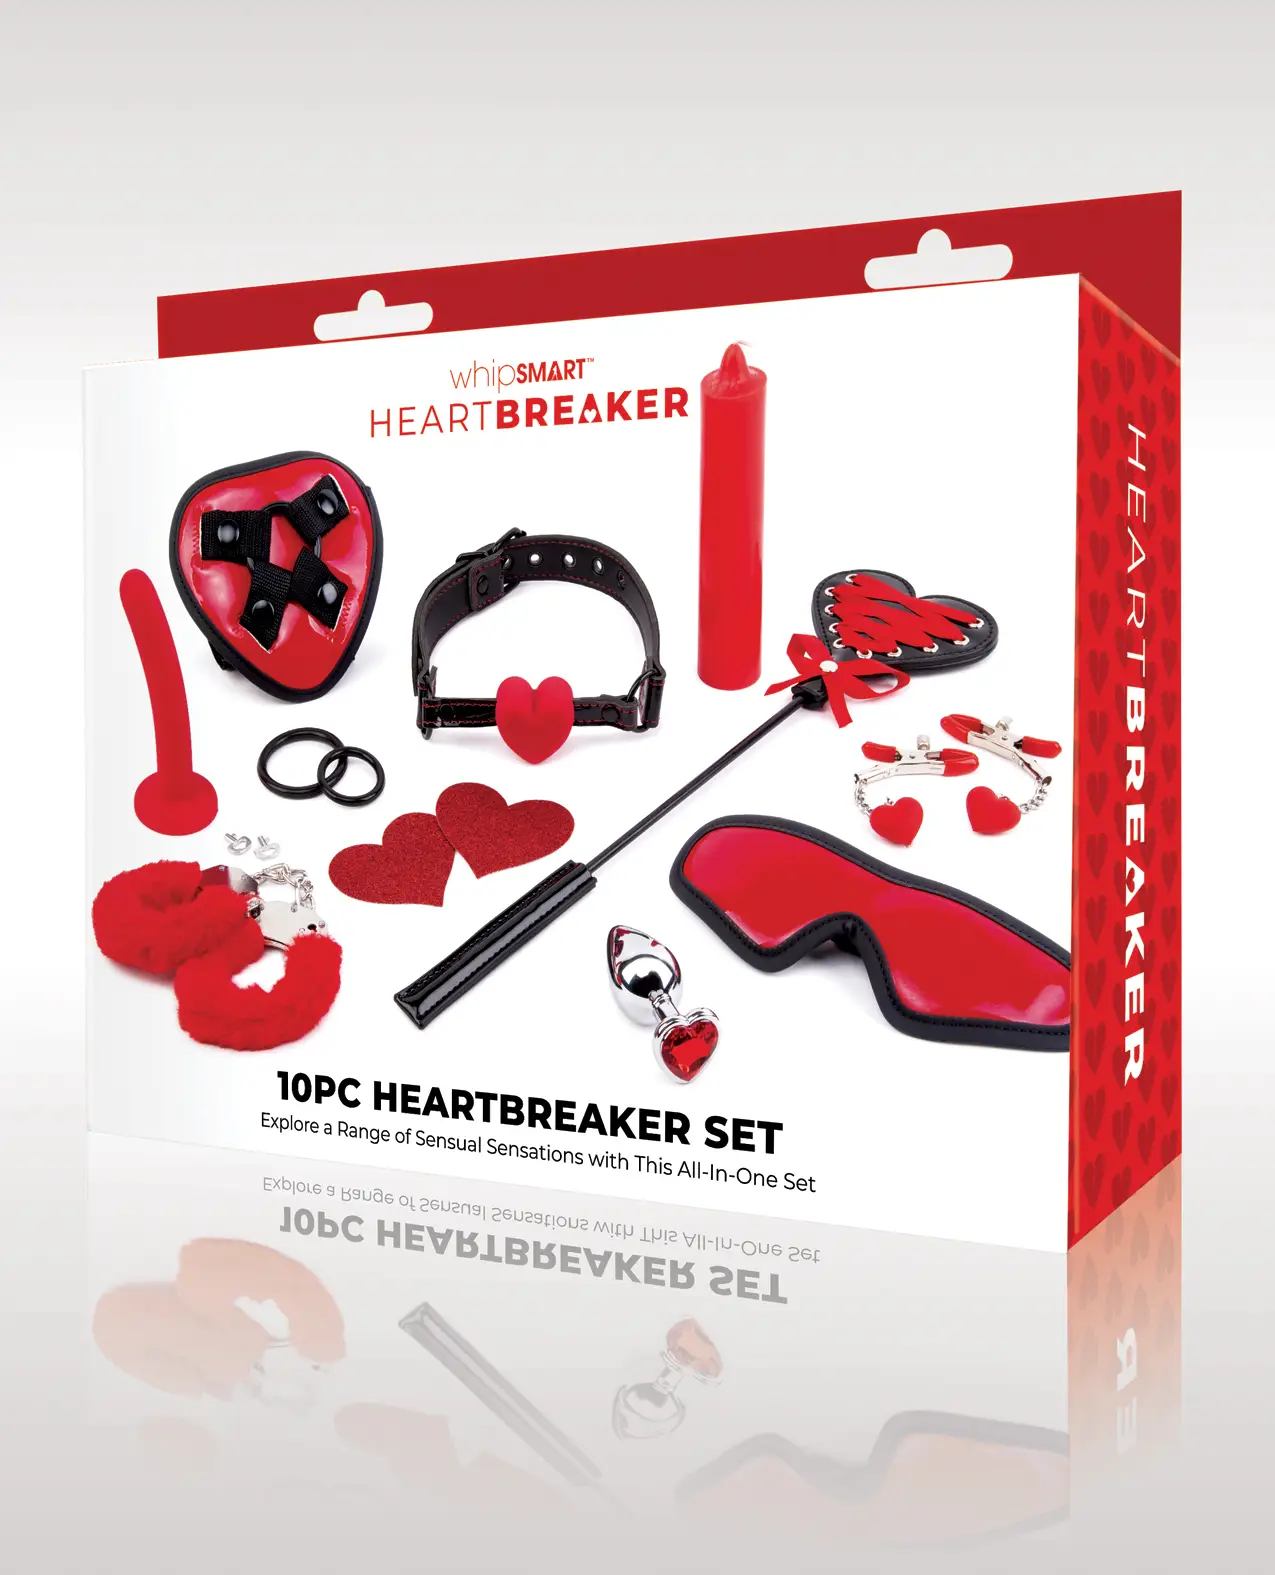 white and red box picturing the contents of the package. Includes a Red Heart-shaped  Harness, Silicone Dildo 5 inches, Ball Gag, Heart Shaped Pasties, Heart Shapes Crop, Red Mask, furry hand/ankle cuffs, Metal Butt Plug with a heart-shaped jewel, Hot Wax Candle, cock ring 